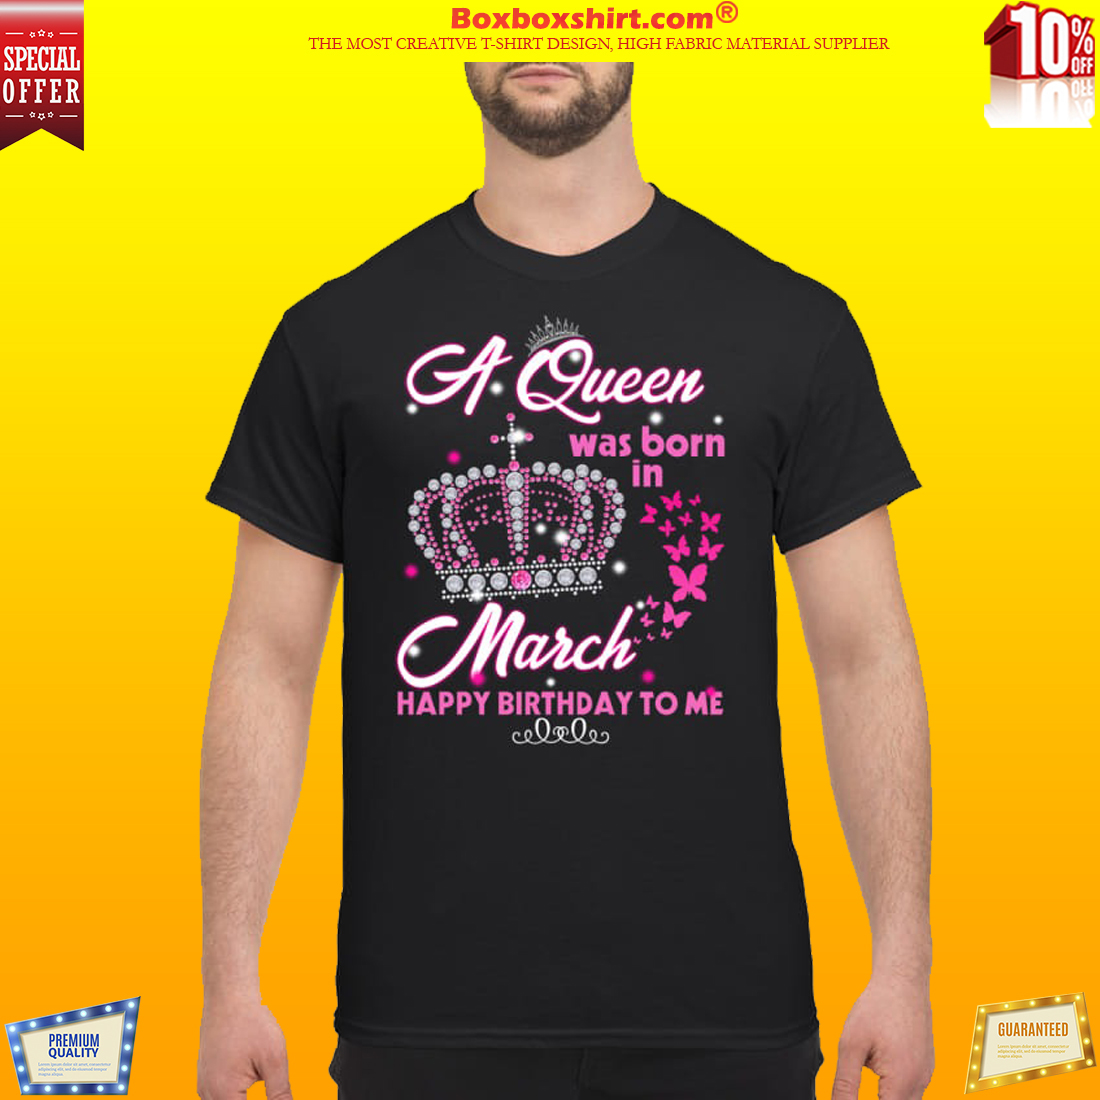 A Queen was born in March happy birthday to me classic shirt